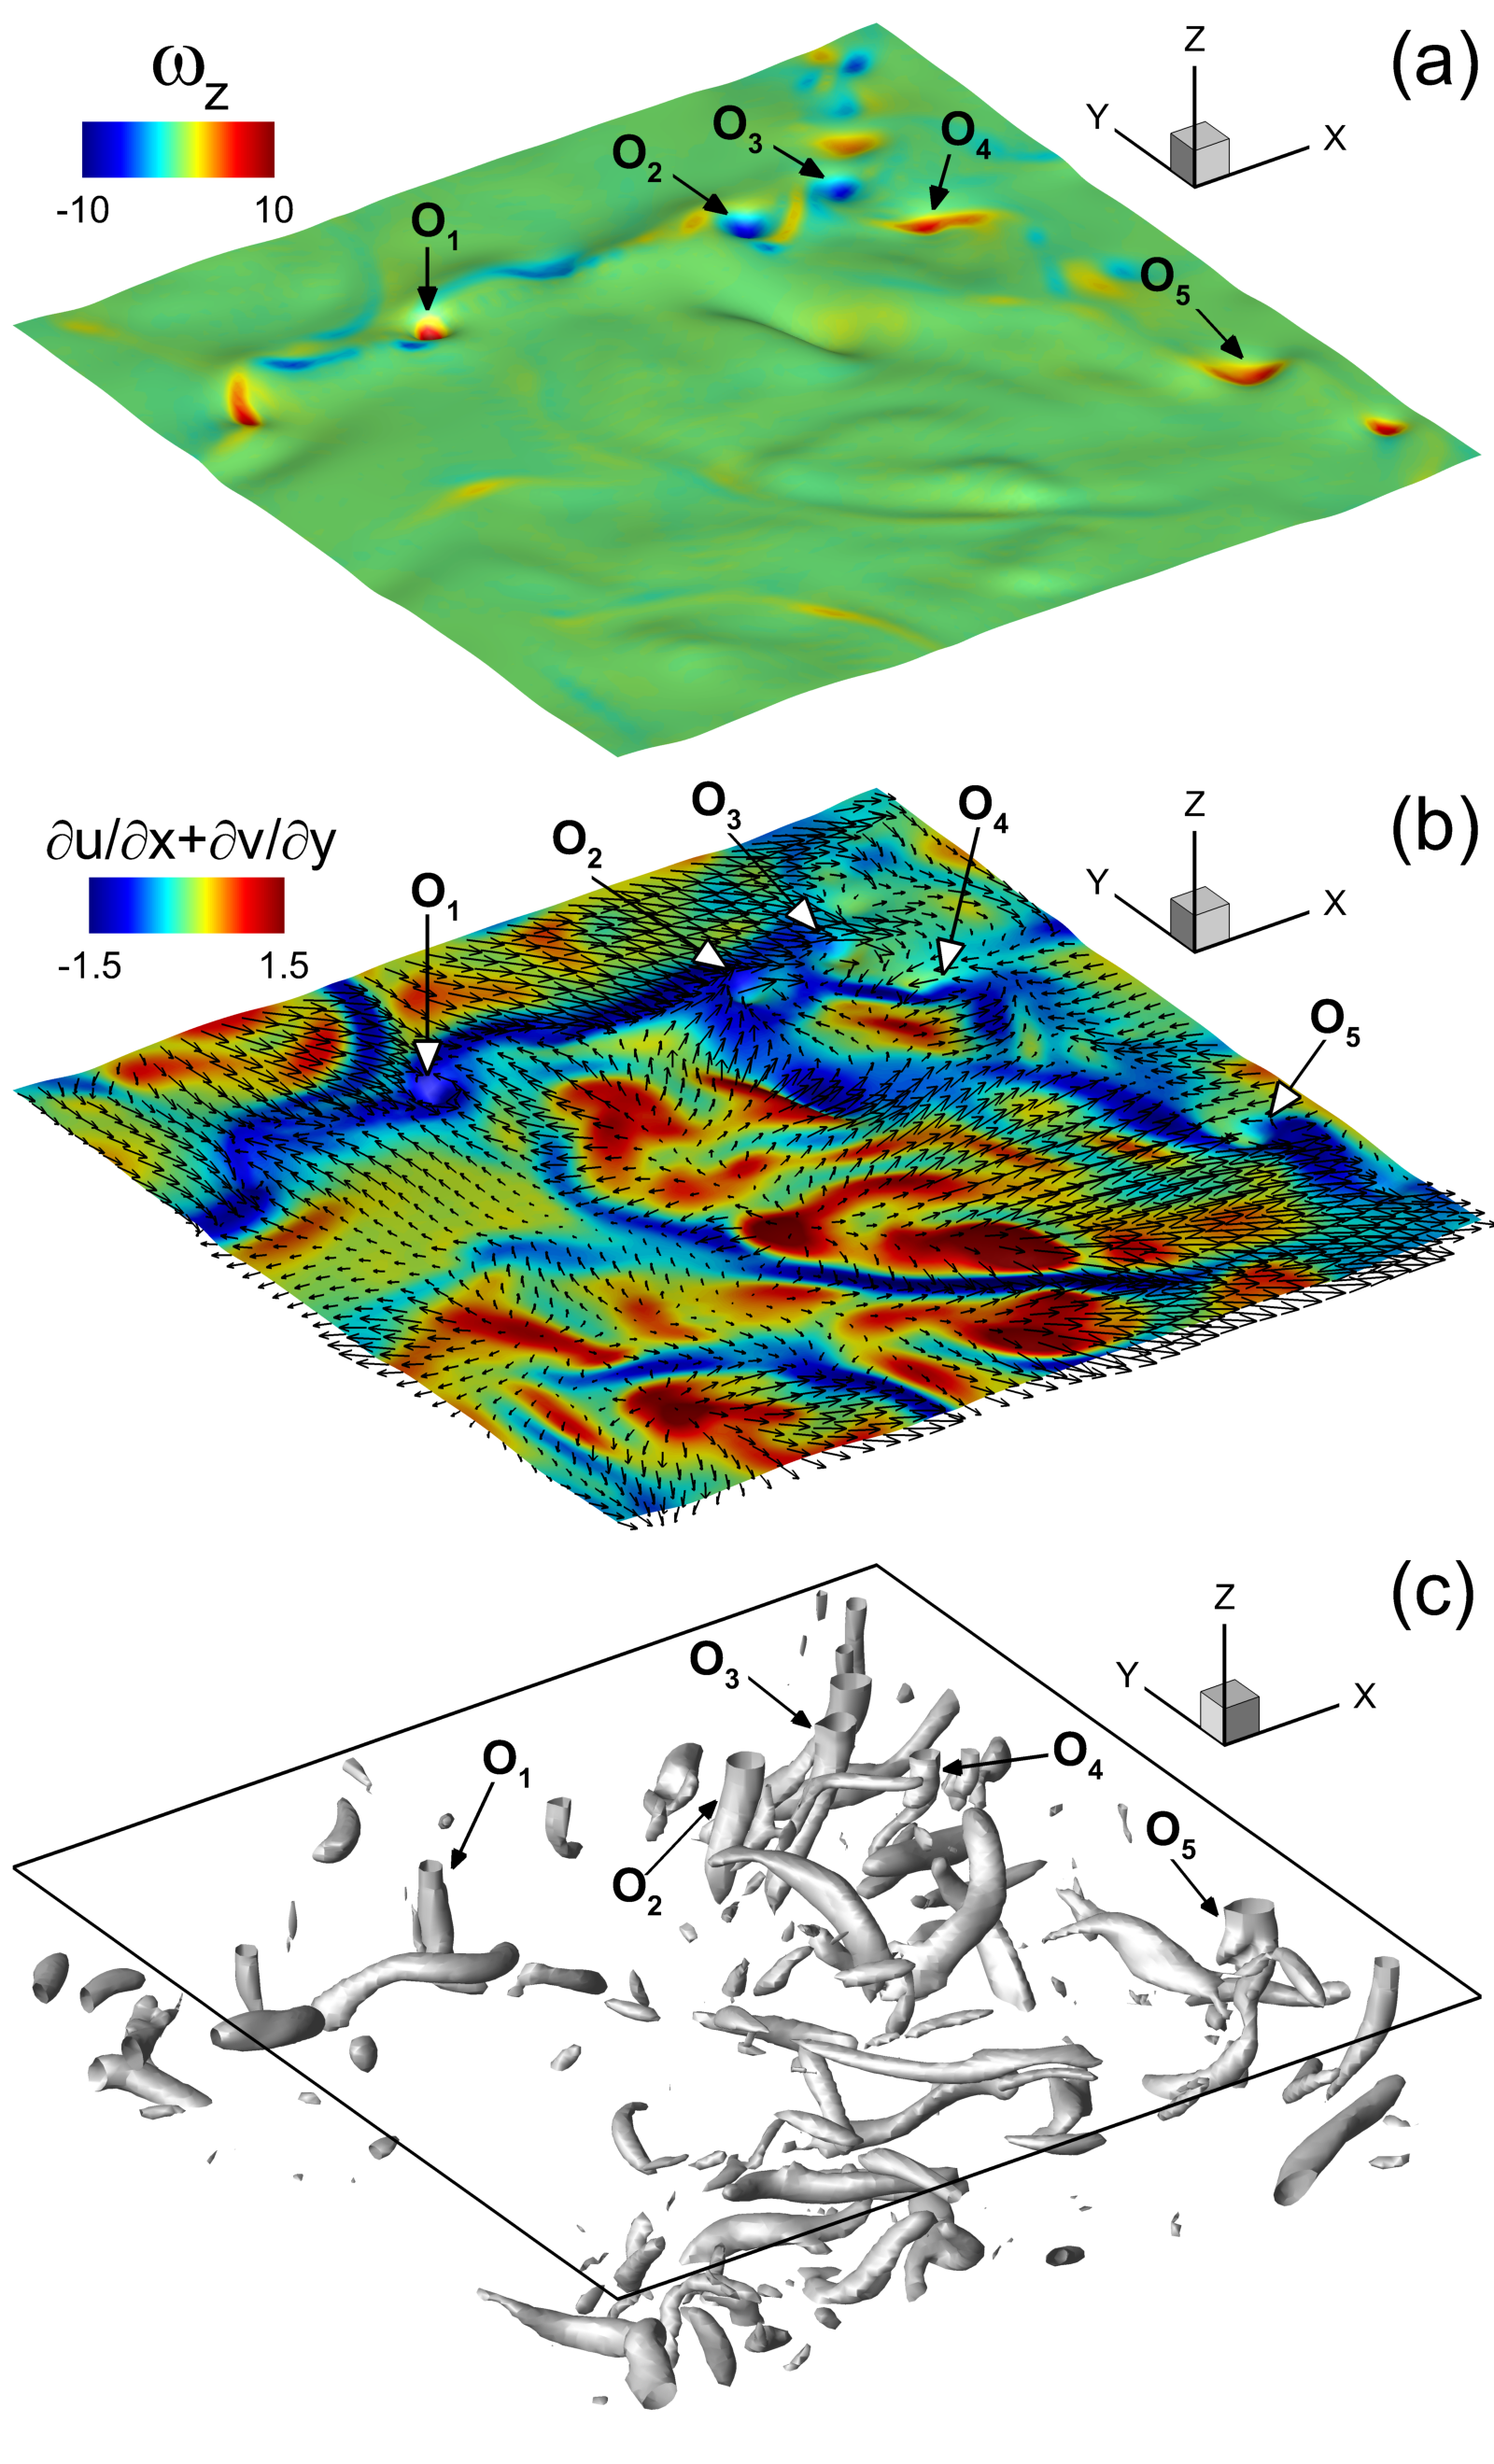 Surface deformation generated by complex vortical structures in the turbulence underneath the surface.  The surface-connected vortices O_1 to O_5 are indicated.  Contours of the vertical vorticity omega_z and the surface divergence du/dx+dv/dy are plotted in (a) and (b), respectively.  In (b), the velocity vectors (u,v) are also plotted for every four grid points.  In (c), the vortices are represented by the lambda_2 method.